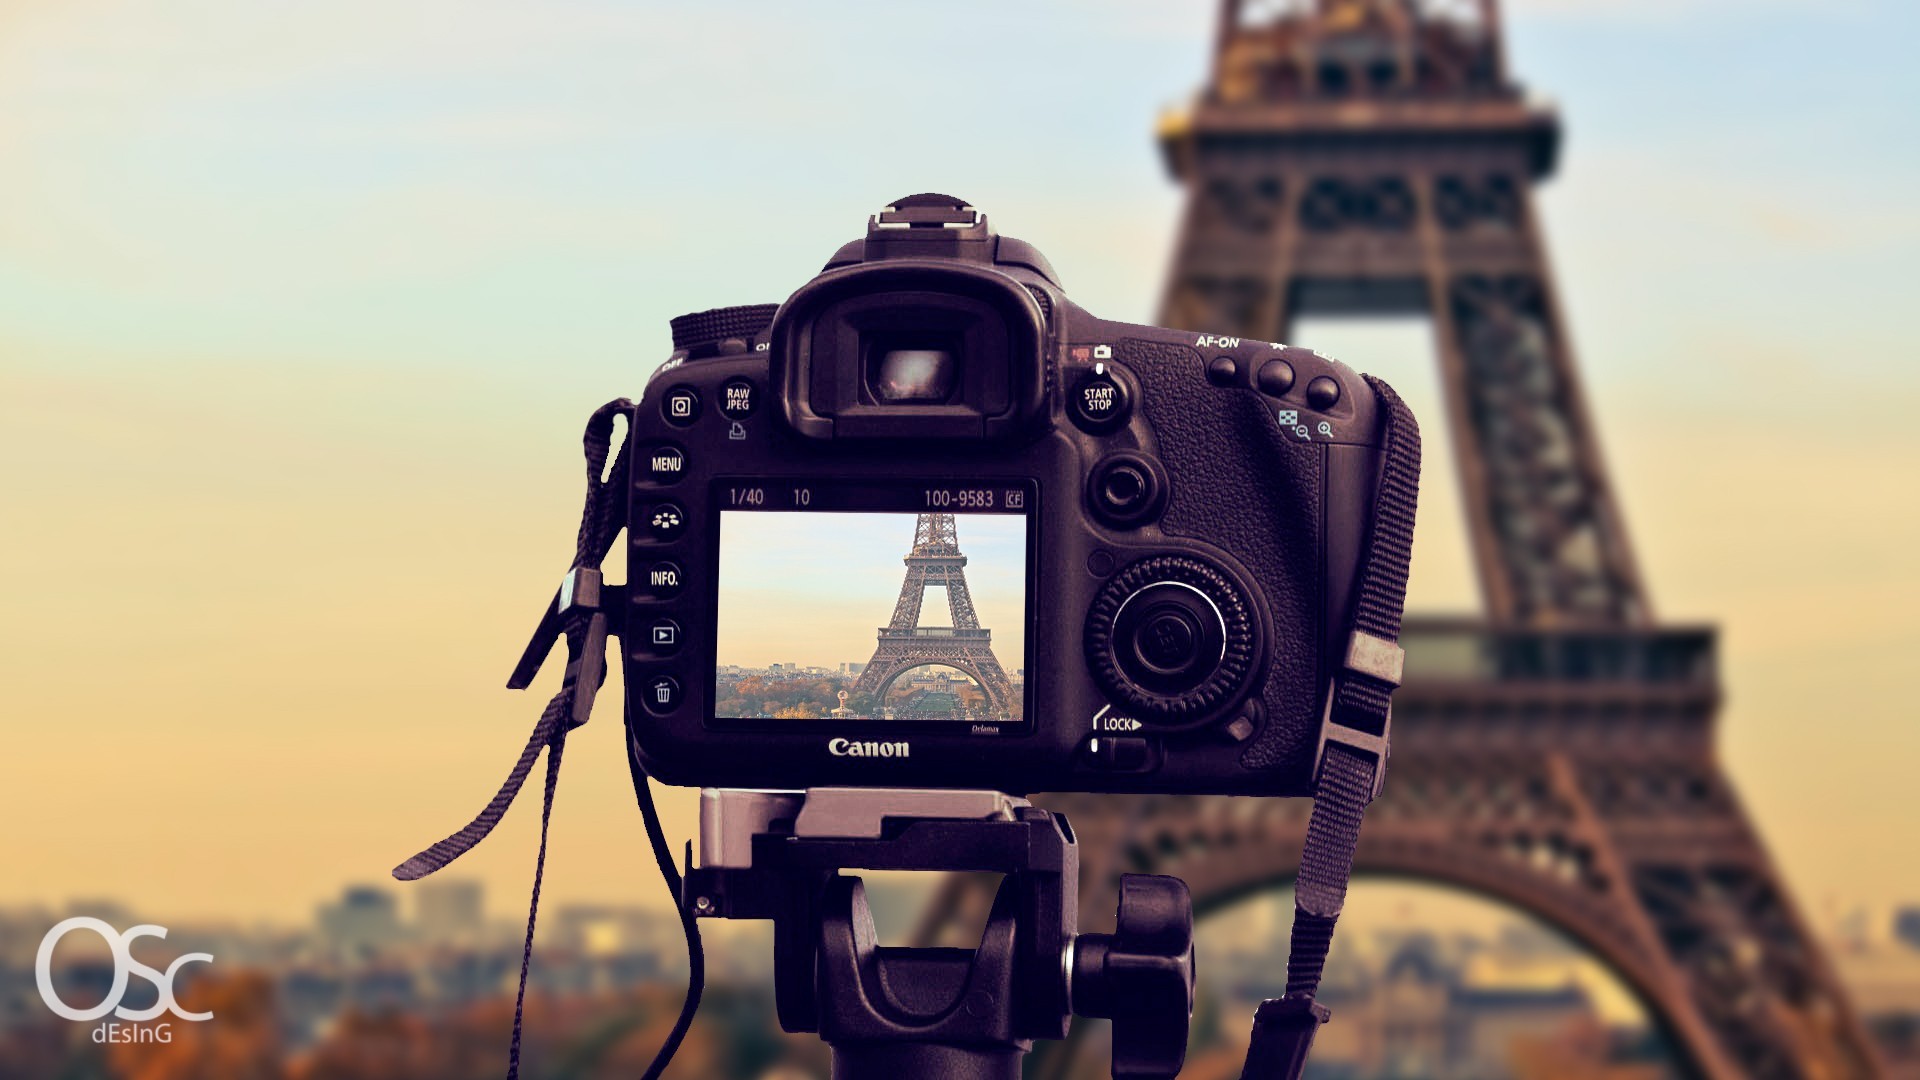 General 1920x1080 Eiffel Tower Canon camera picture-in-picture Paris France technology numbers landmark Europe picture